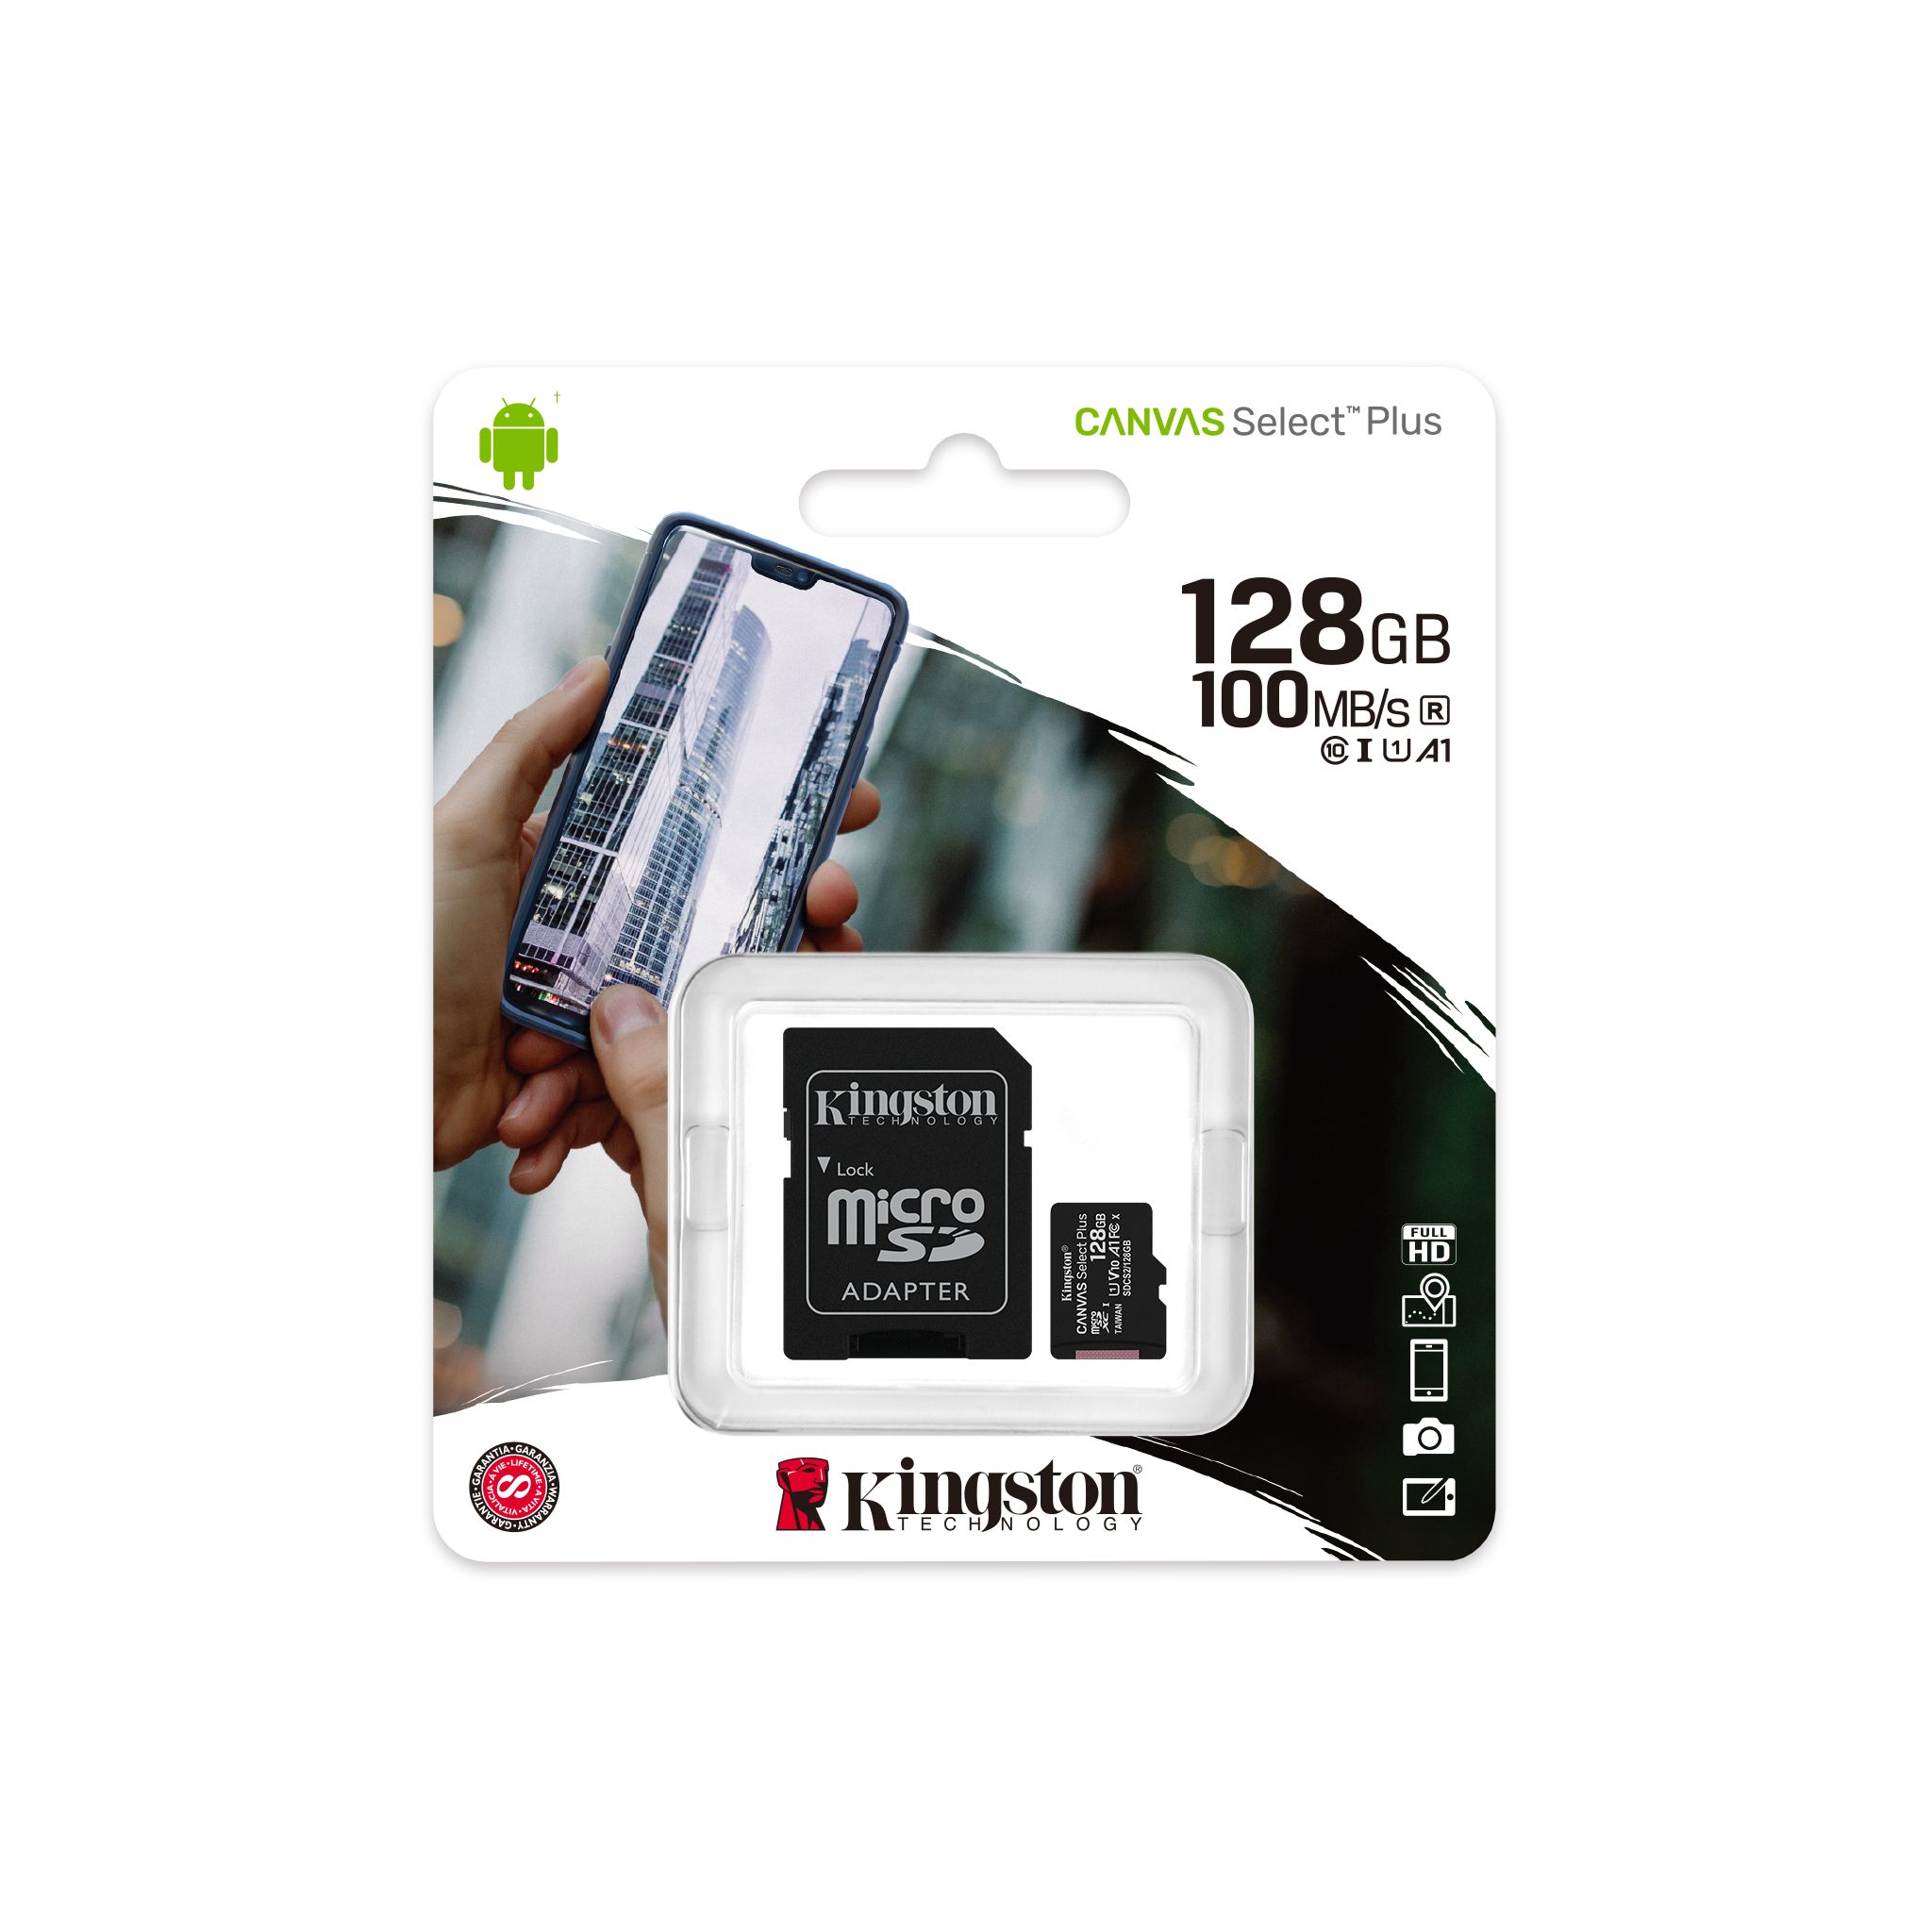 Kingston 128GB Celkon Q40 100MBs Works with Kingston MicroSDXC Canvas Select Plus Card Verified by SanFlash. 